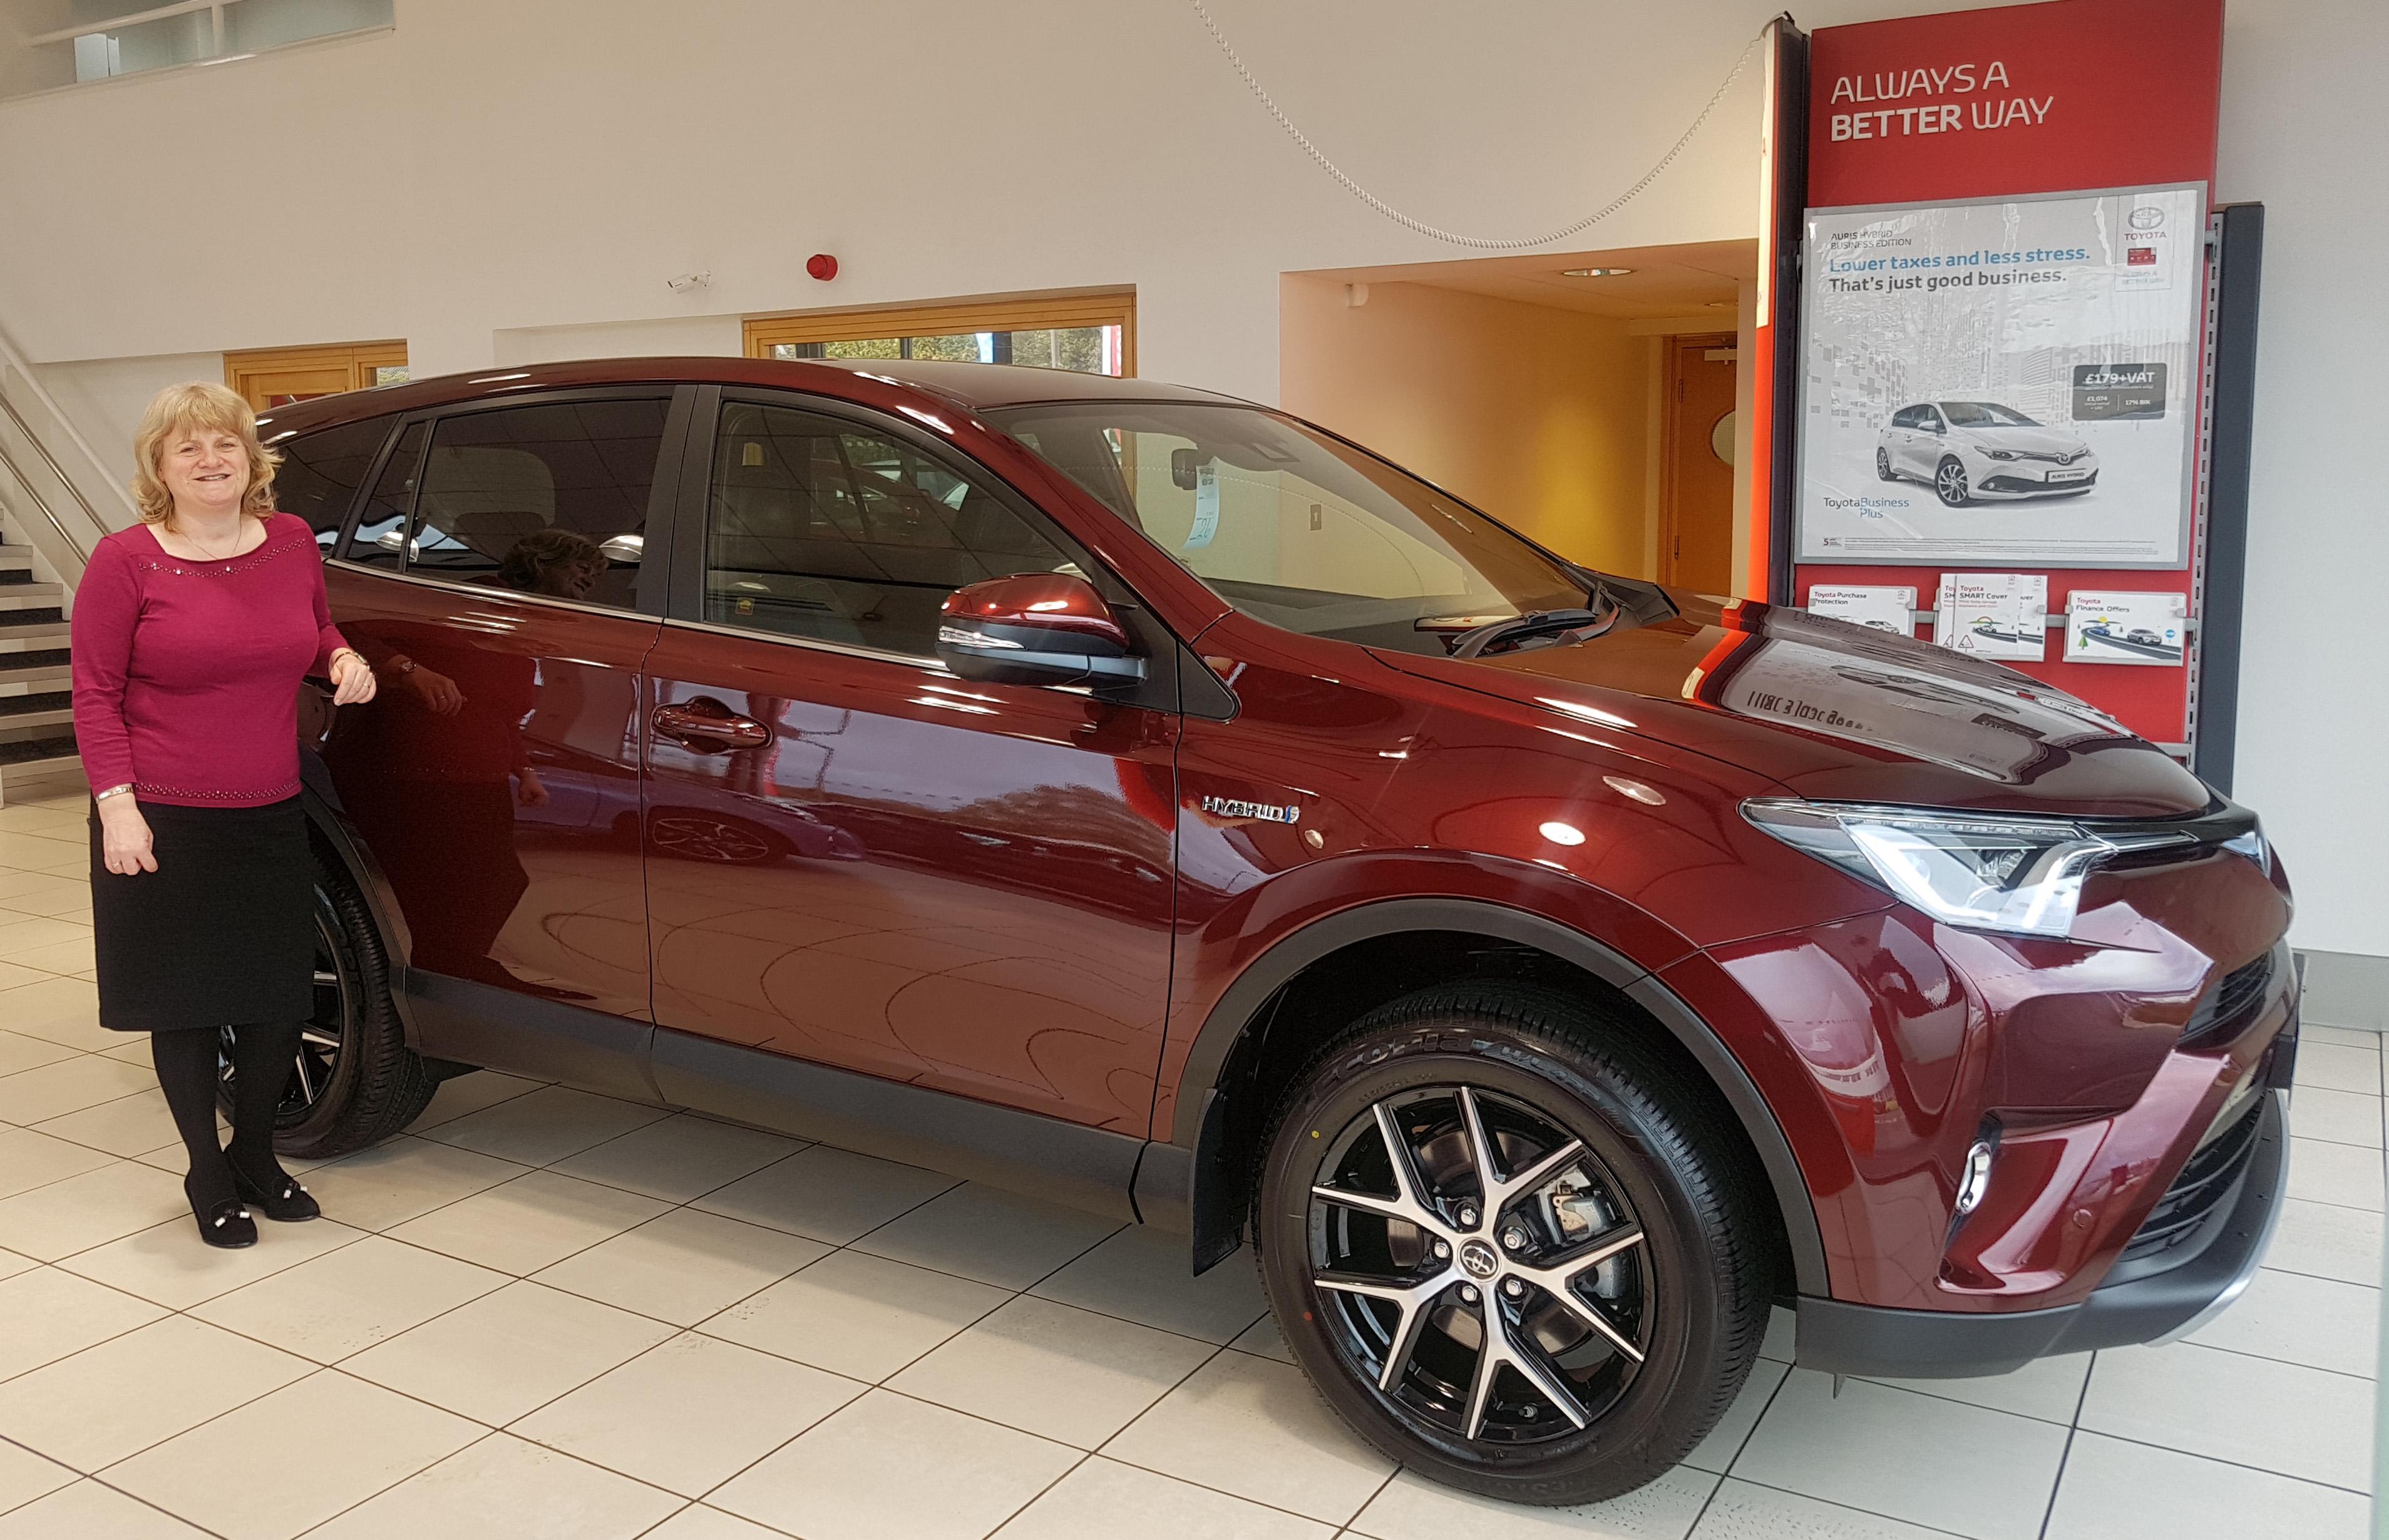 feudale Instrument Vær venlig RRG Bradford Toyota в Twitter: „Here's Nicola collecting her new #RAV4 in  stunning Tokyo Red 😍 #NewCarDay https://t.co/oDCYQI5eXq“ / Twitter